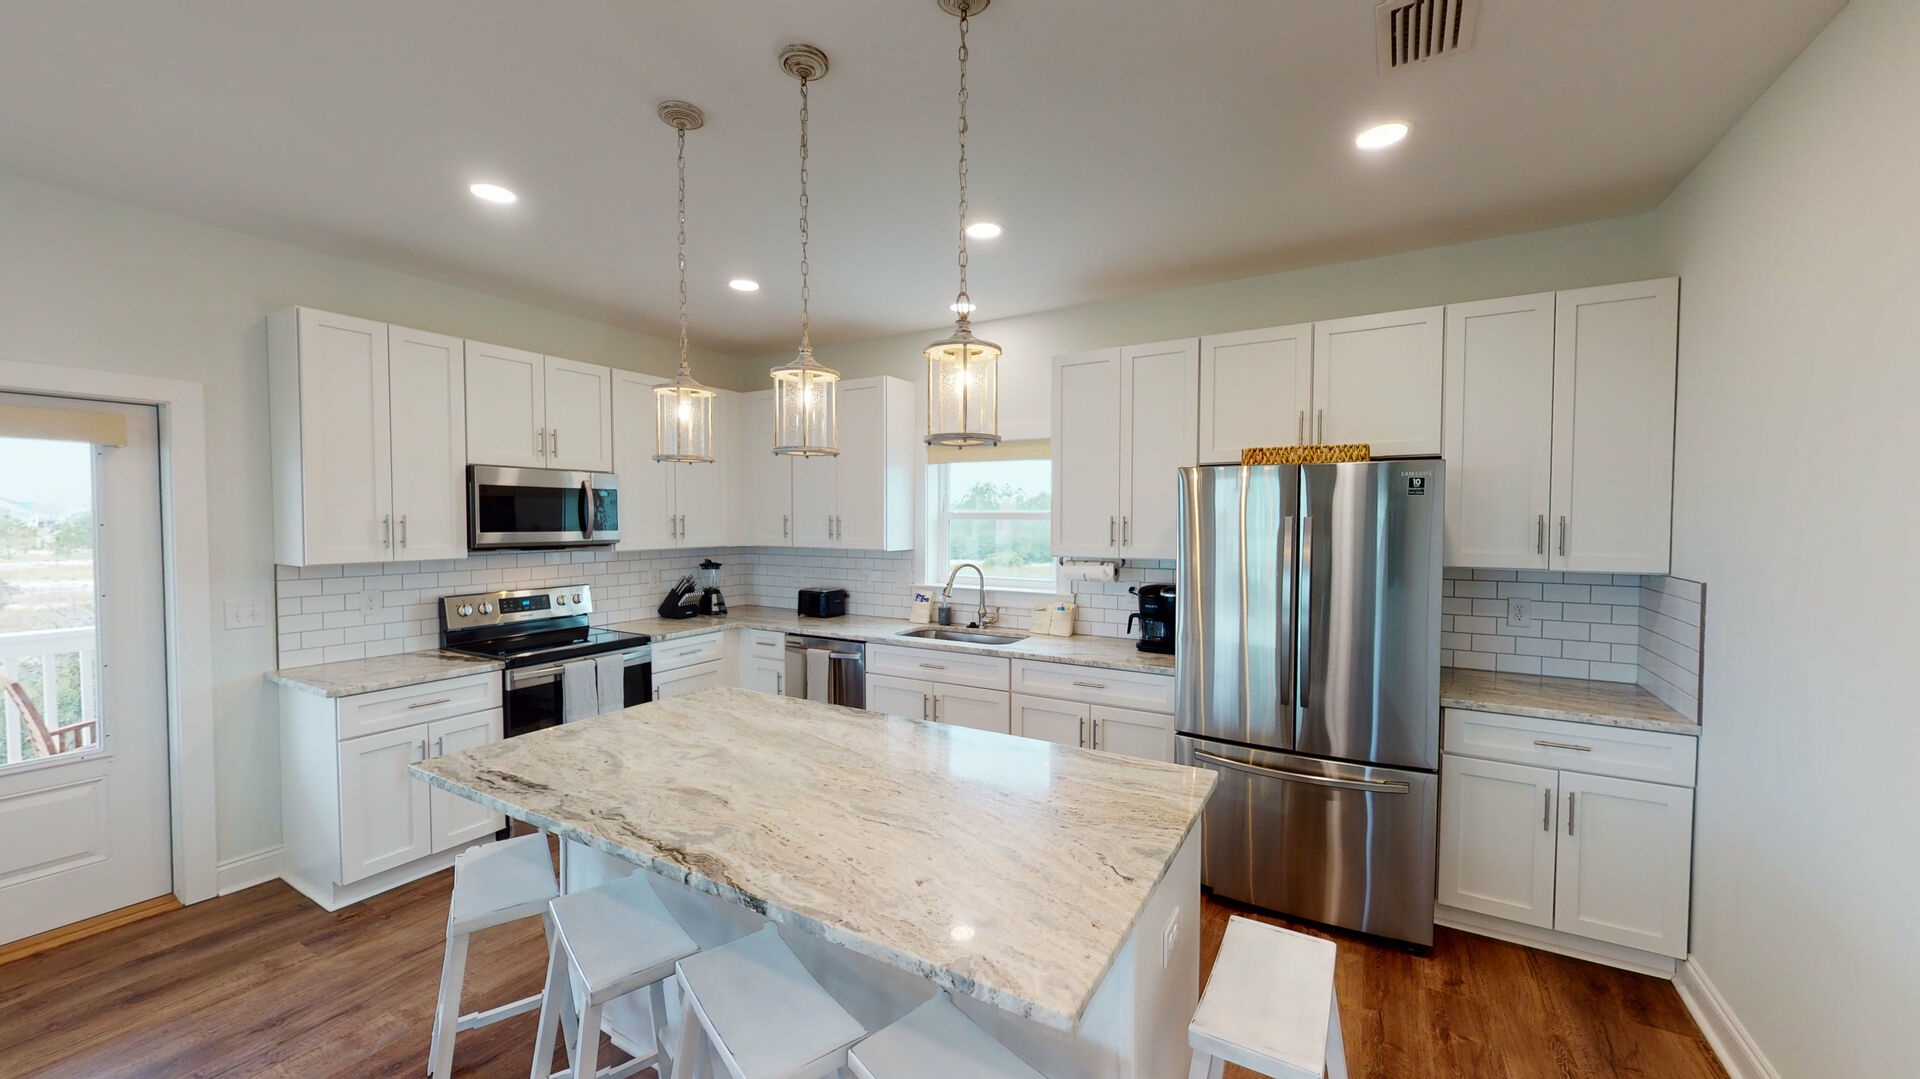 Open kitchen with 5 bar stools and a large Island for everyone to gather around. Stainless steel appliances